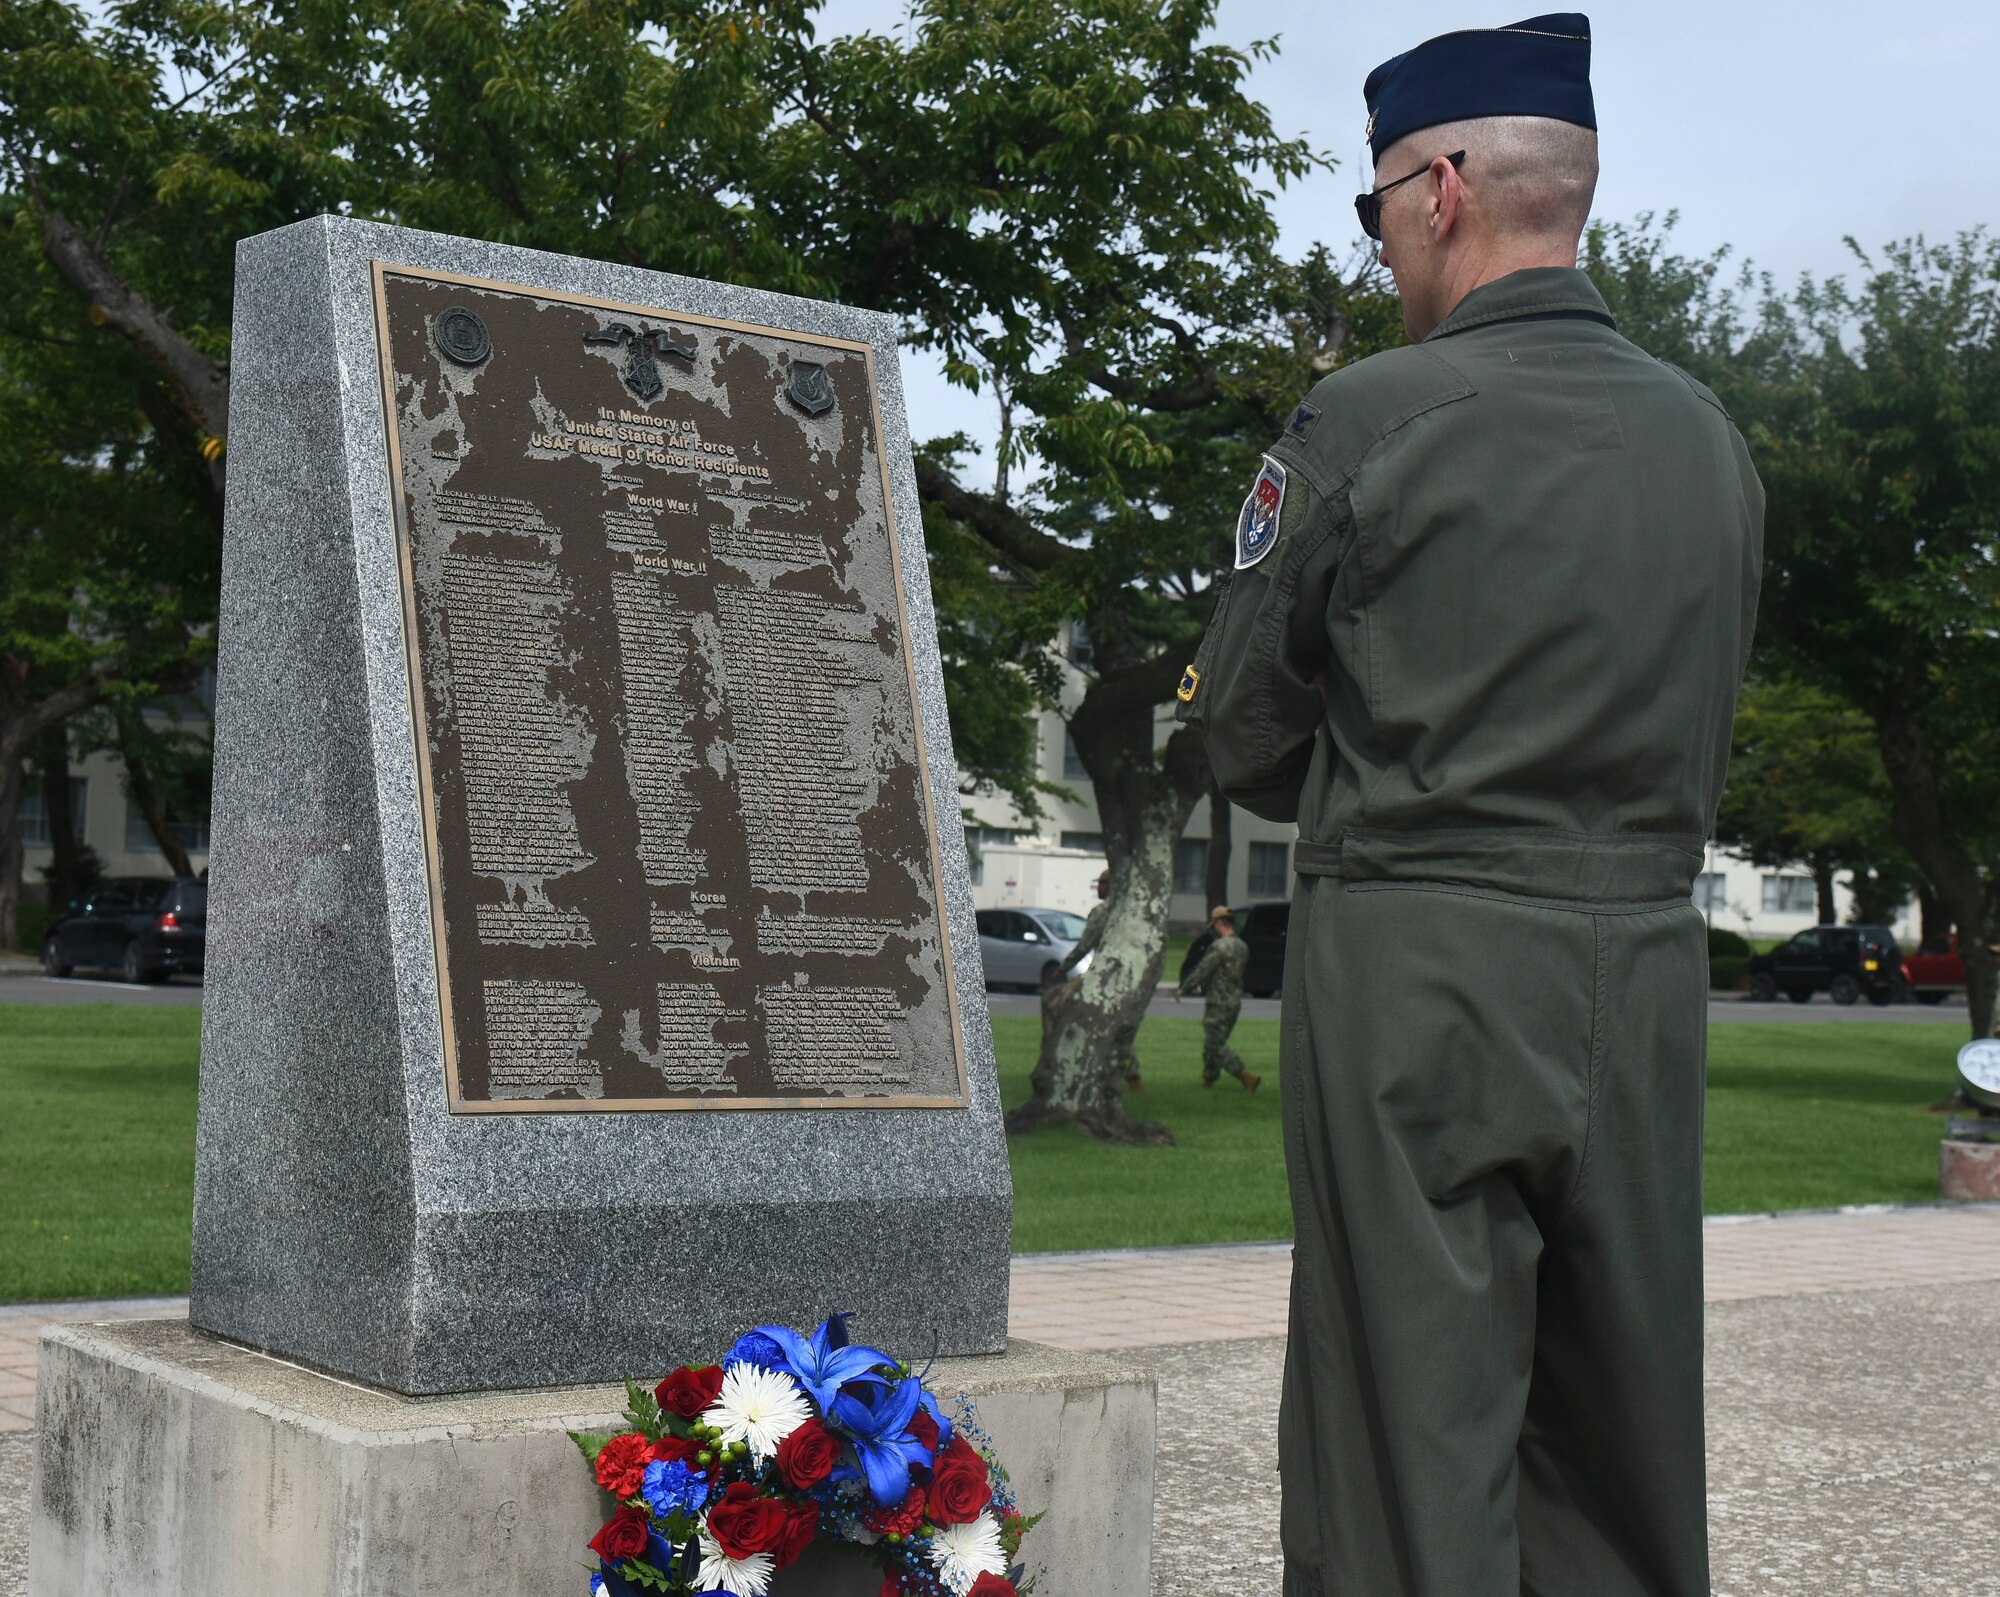 A military member stands in front of a memorial